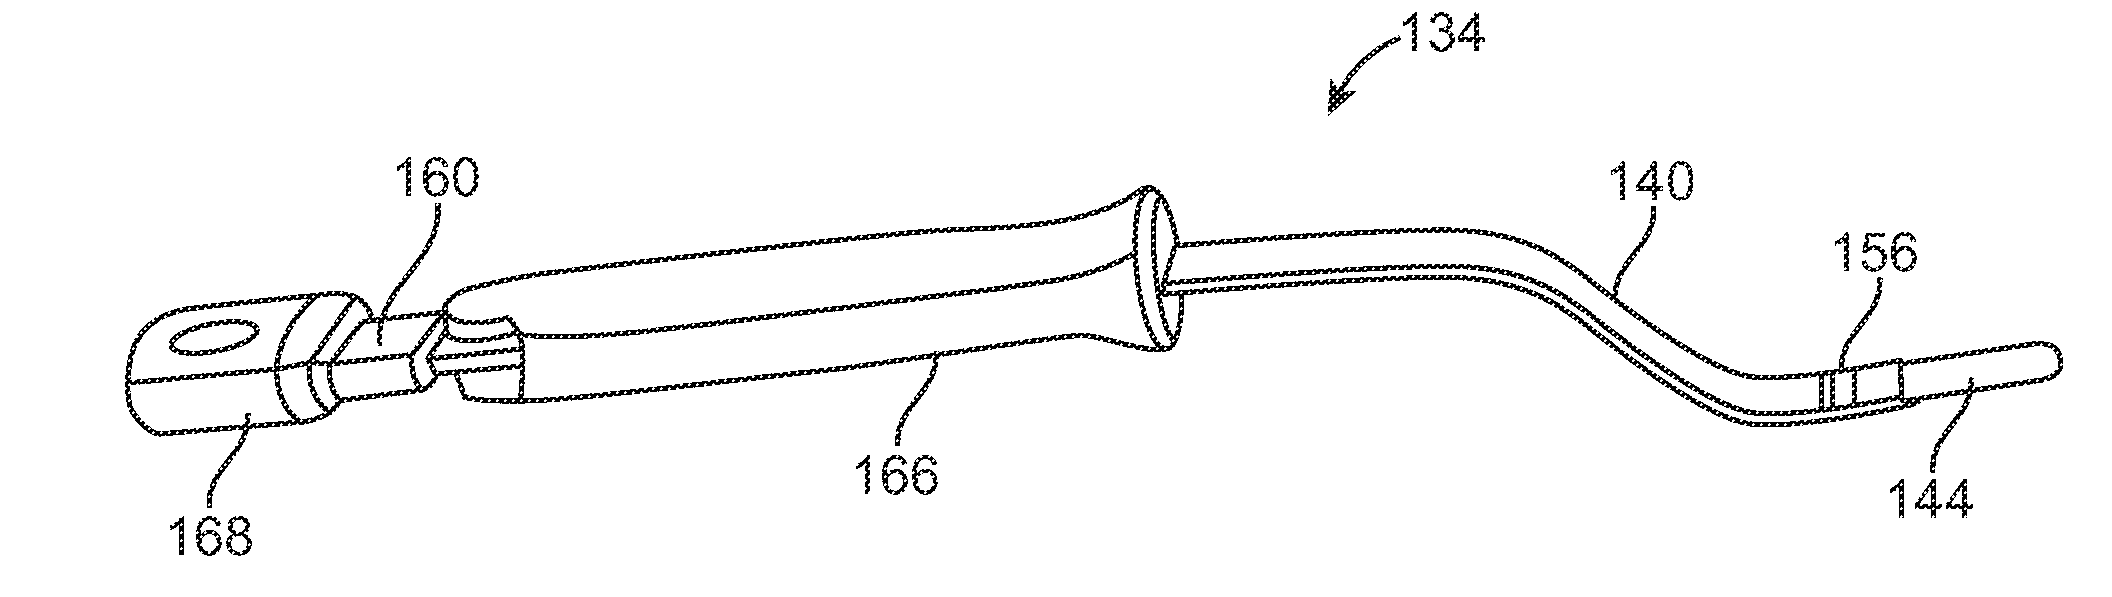 Delivery Tools for Sleep Disorders Treatment Implant and Methods of Implantation